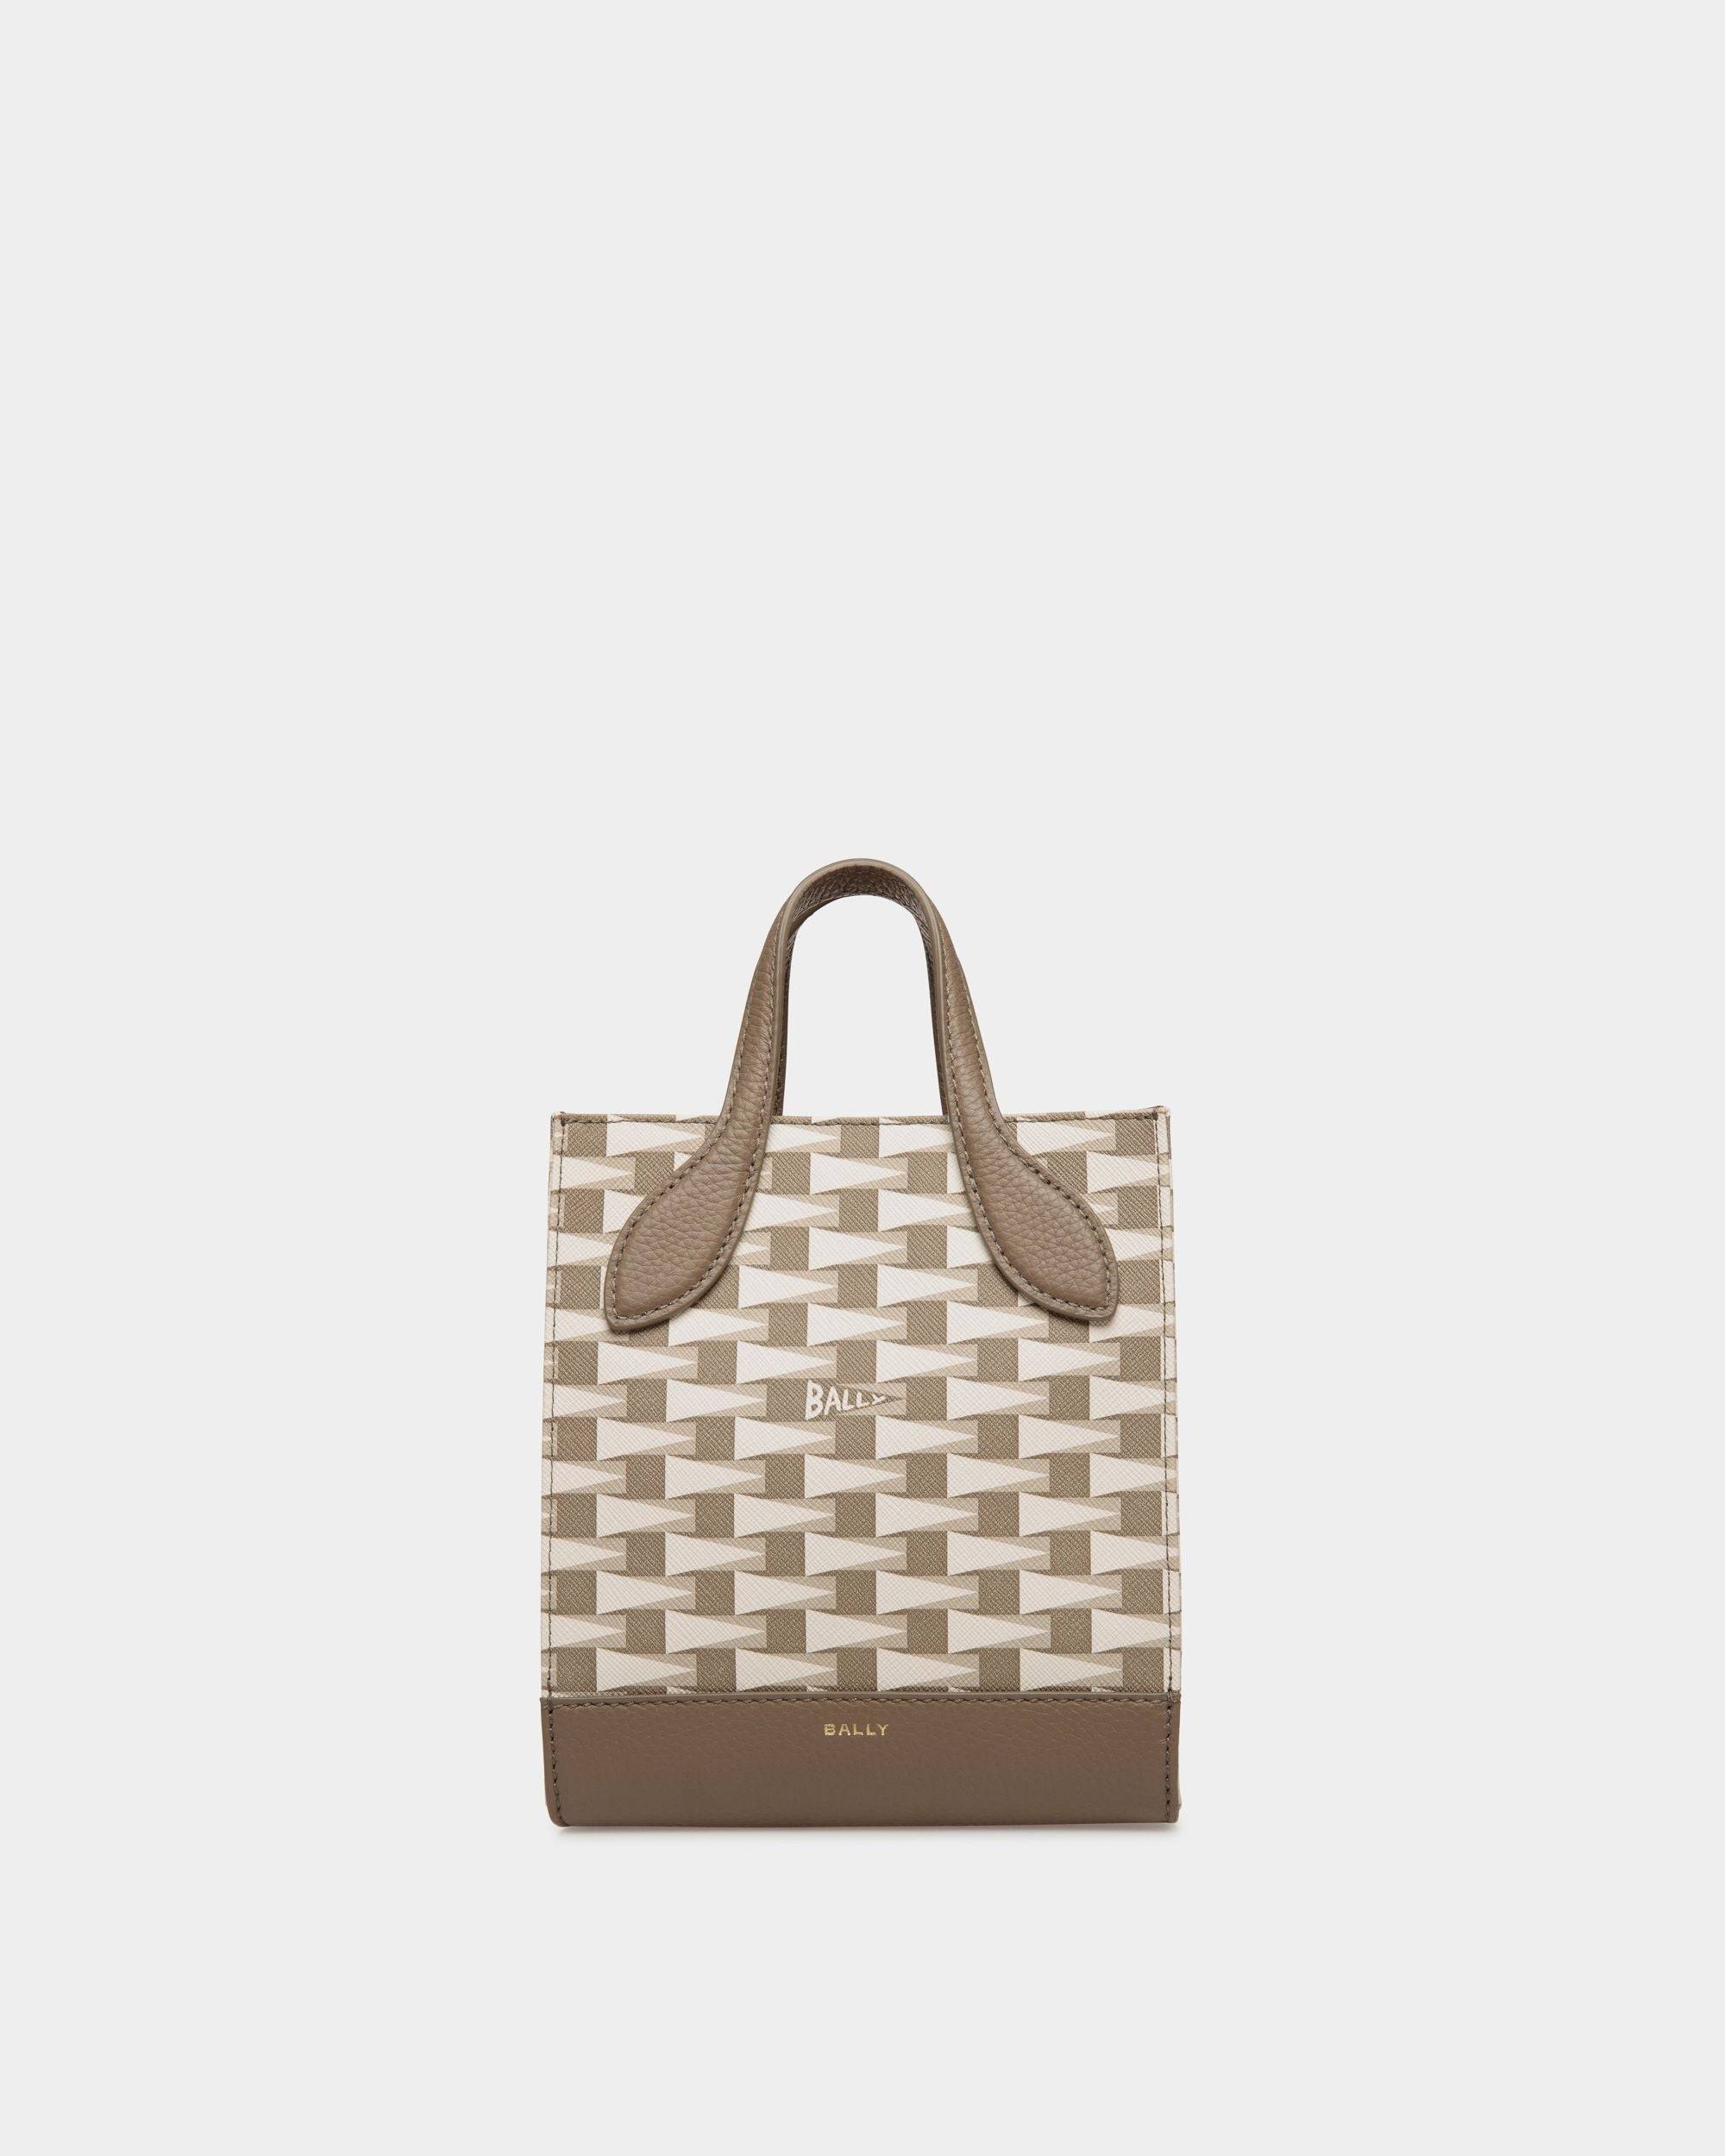 Women's Pennant Mini Tote Bag in Beige TPU | Bally | Still Life Front